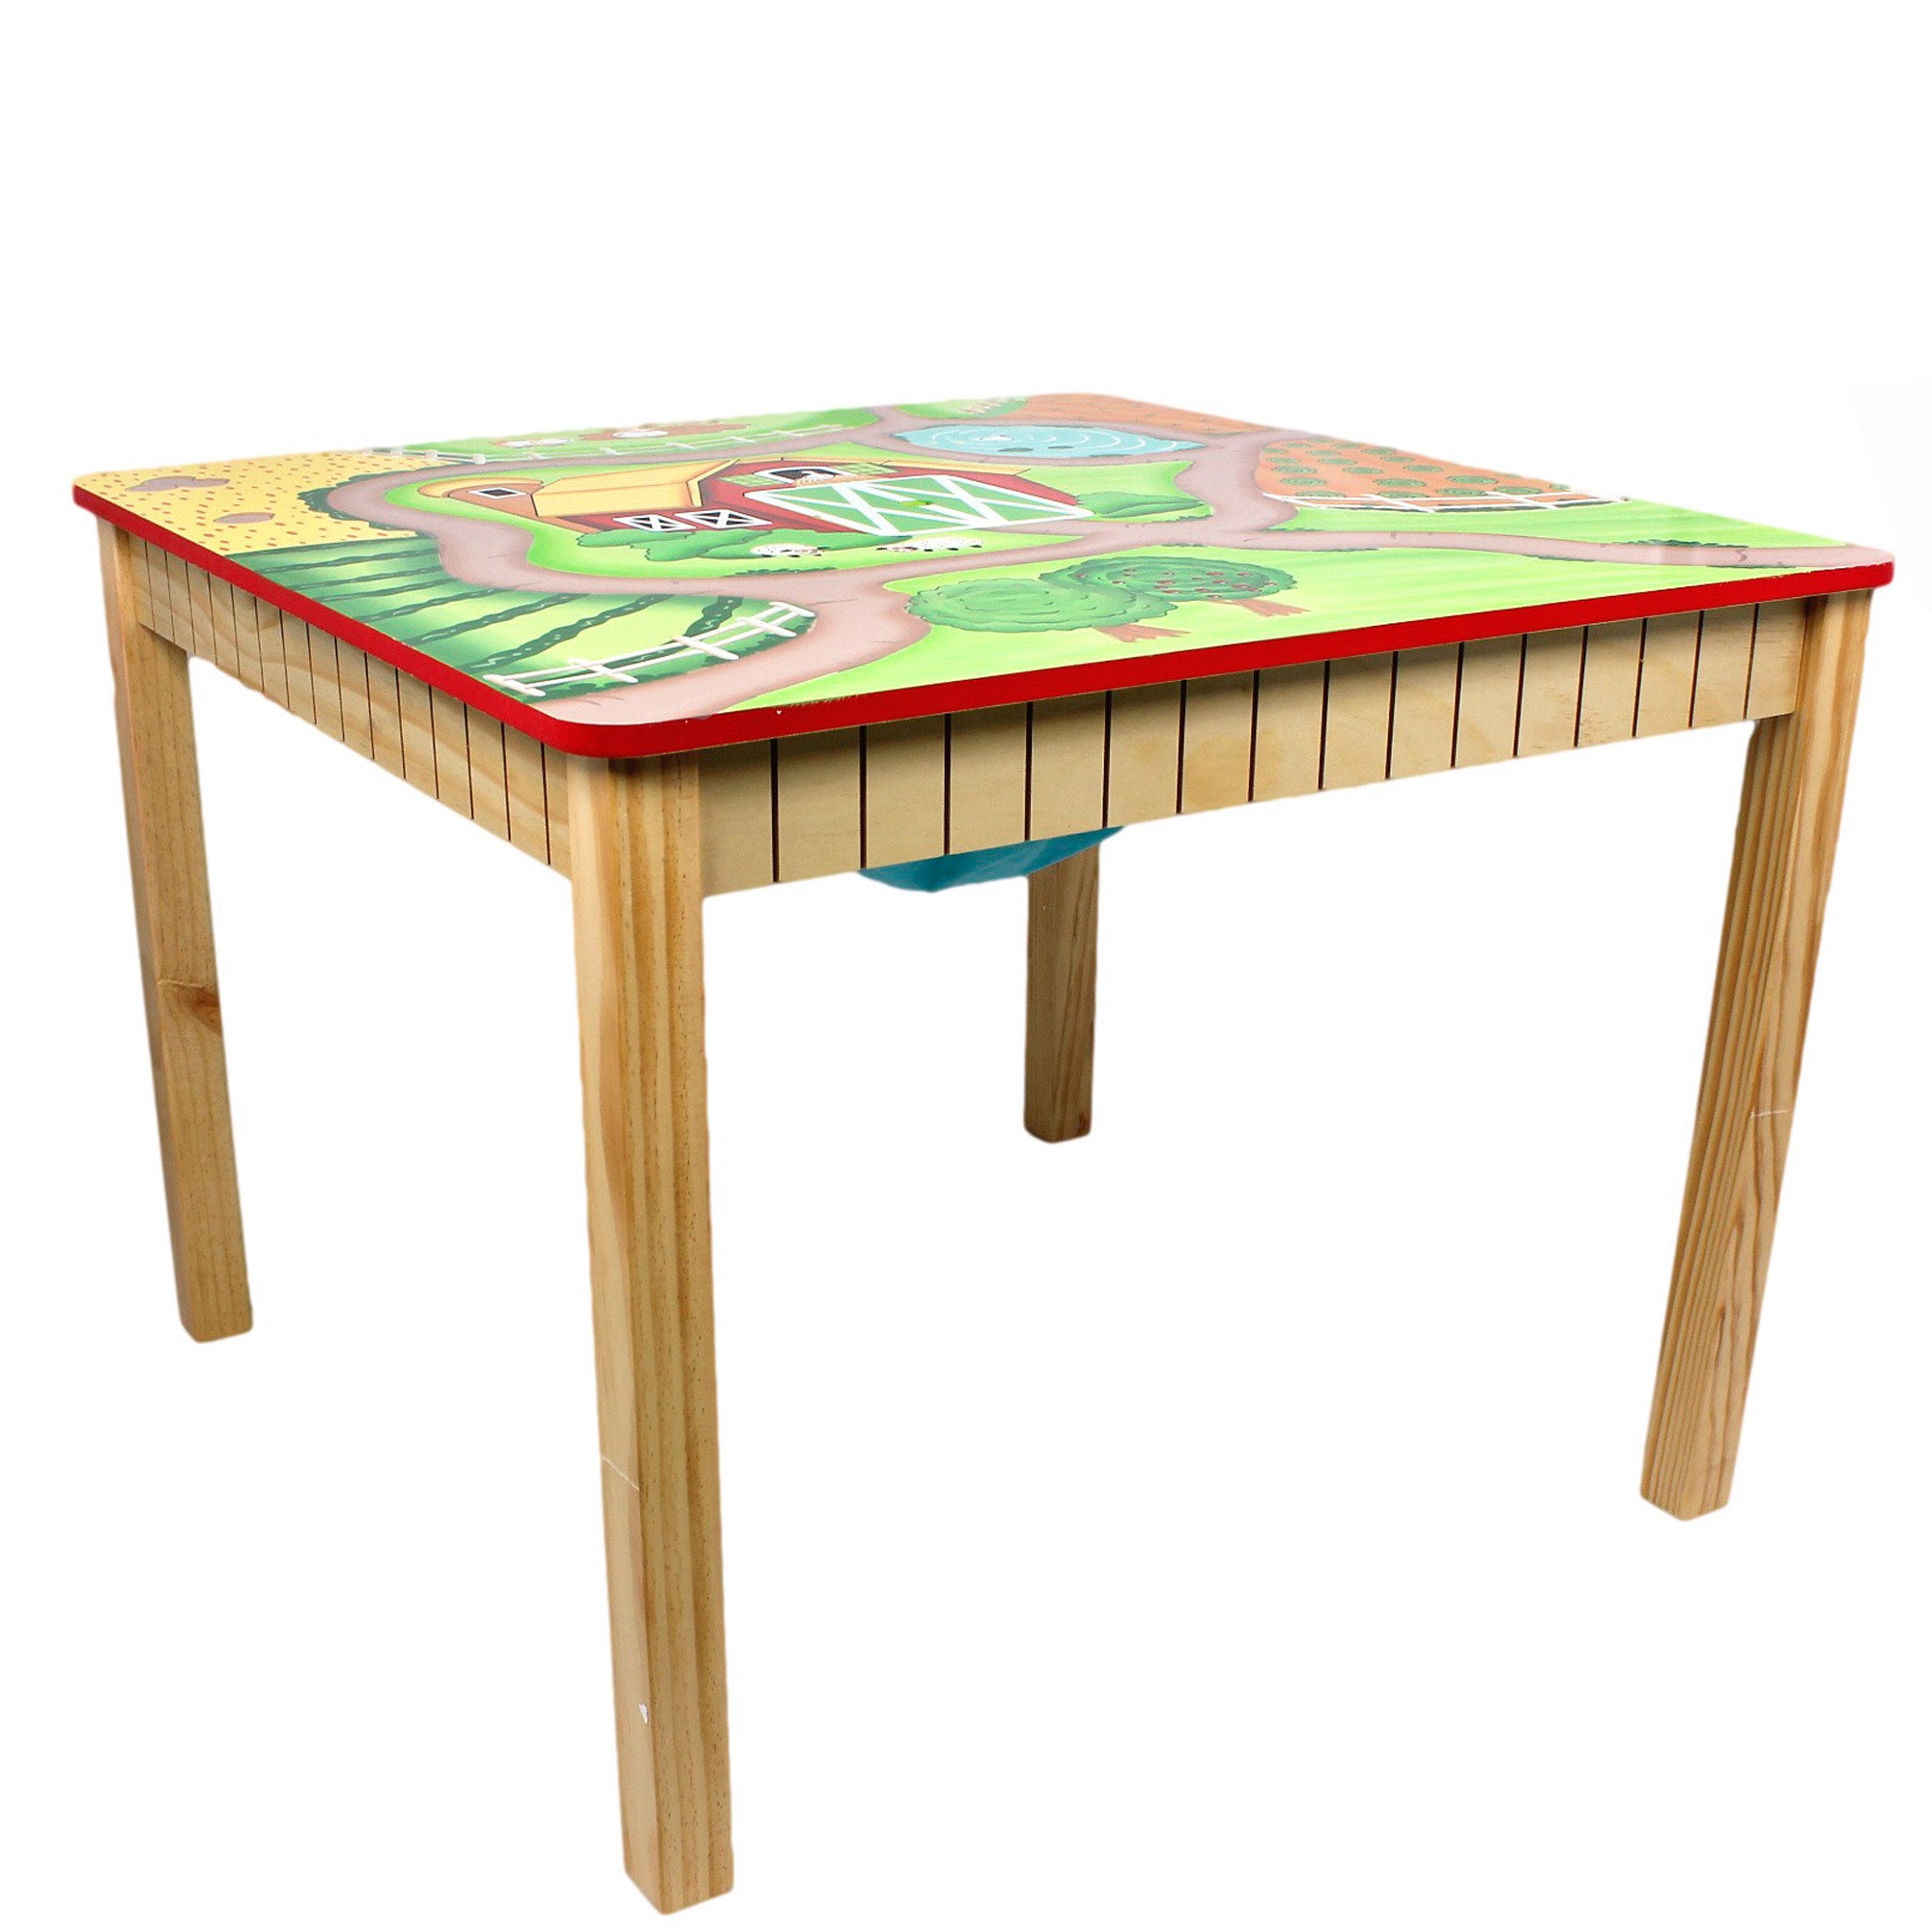 Fantasy Fields Toy Furniture Happy Farm Table with Painted Barnyard Animal Figurines & Built-In Storage, Multicolor